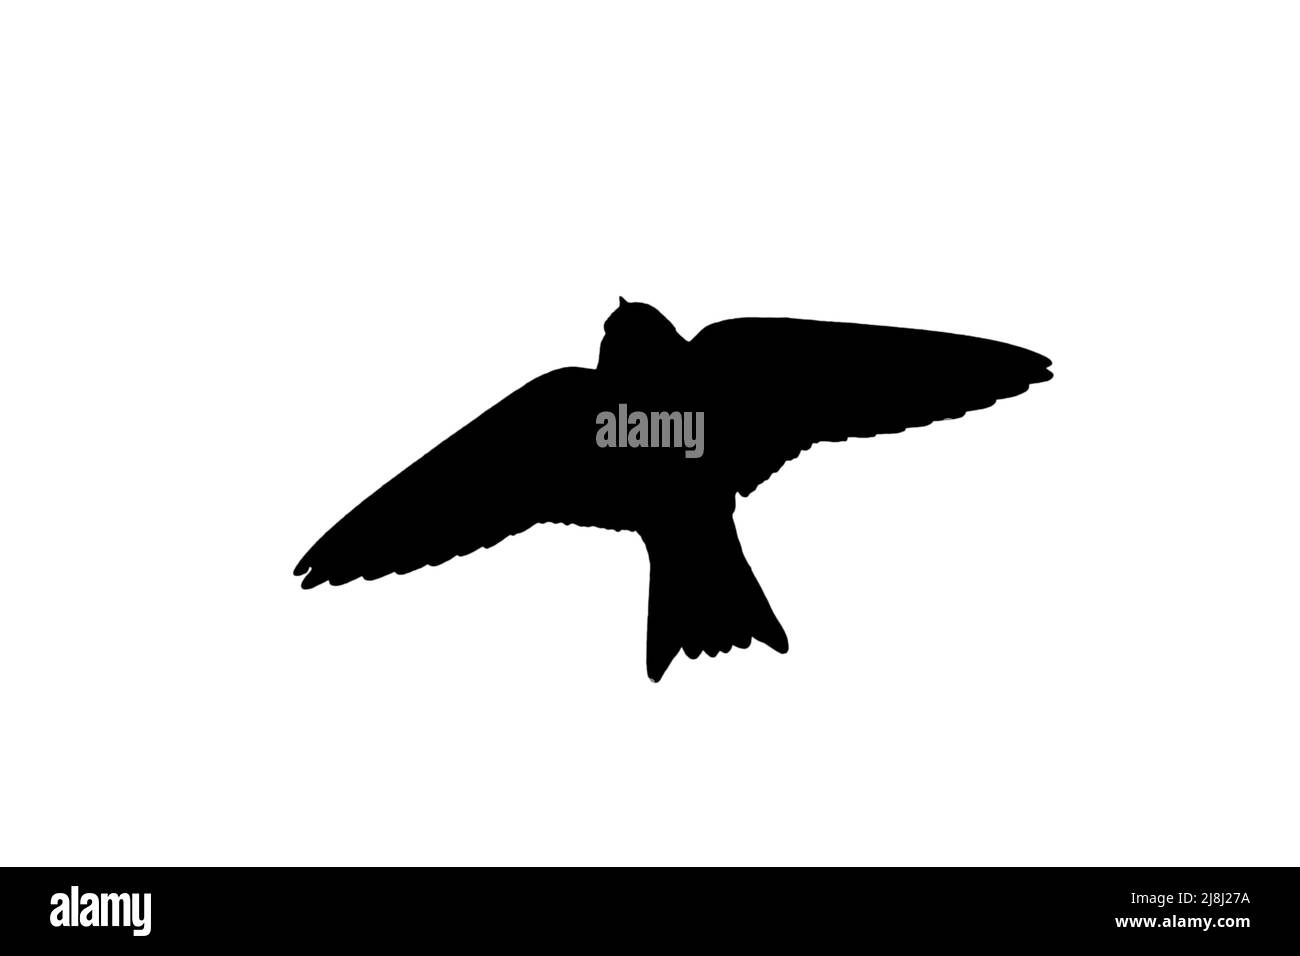 Silhouette of European sand martin / bank swallow (Riparia riparia) in flight outlined against white background to show wings, head and tail shapes Stock Photo